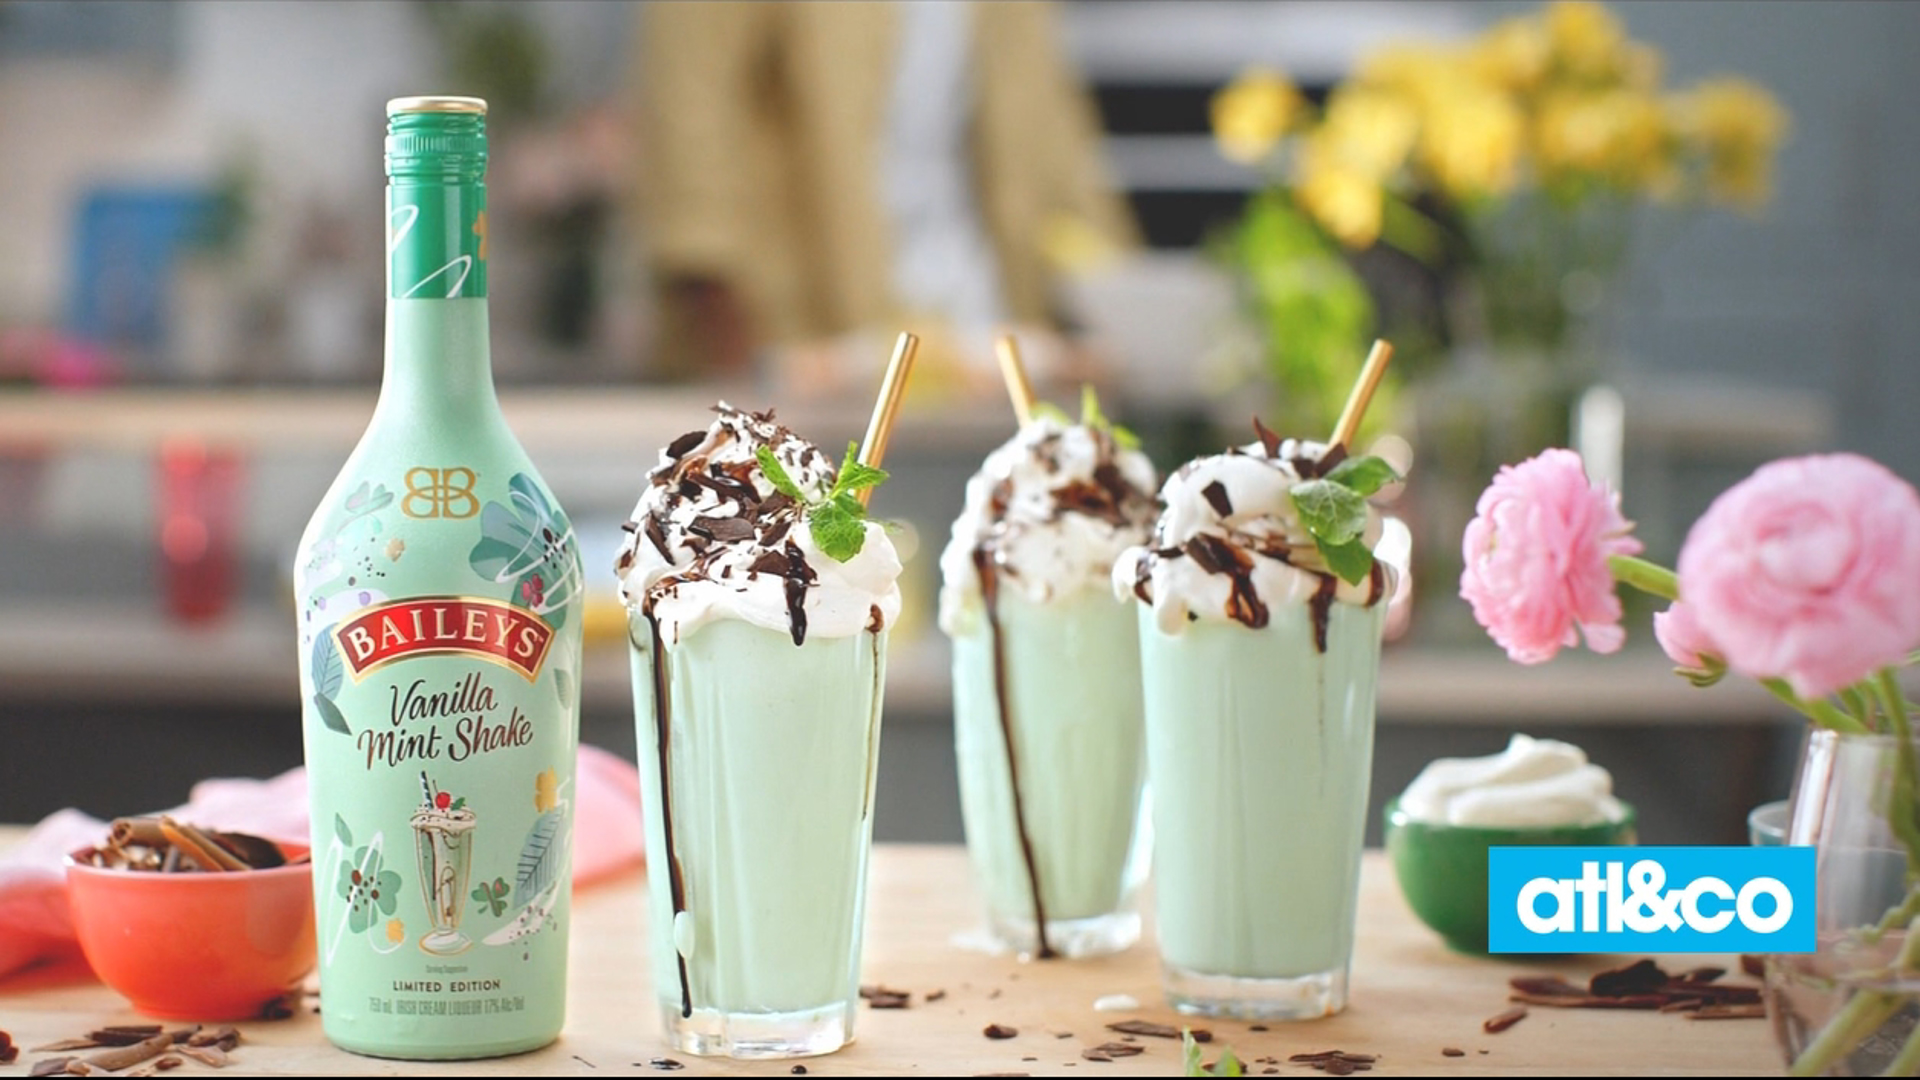 Lifestyle contributor Limor Suss shares how she's celebrating St. Patrick's Day with Baileys.